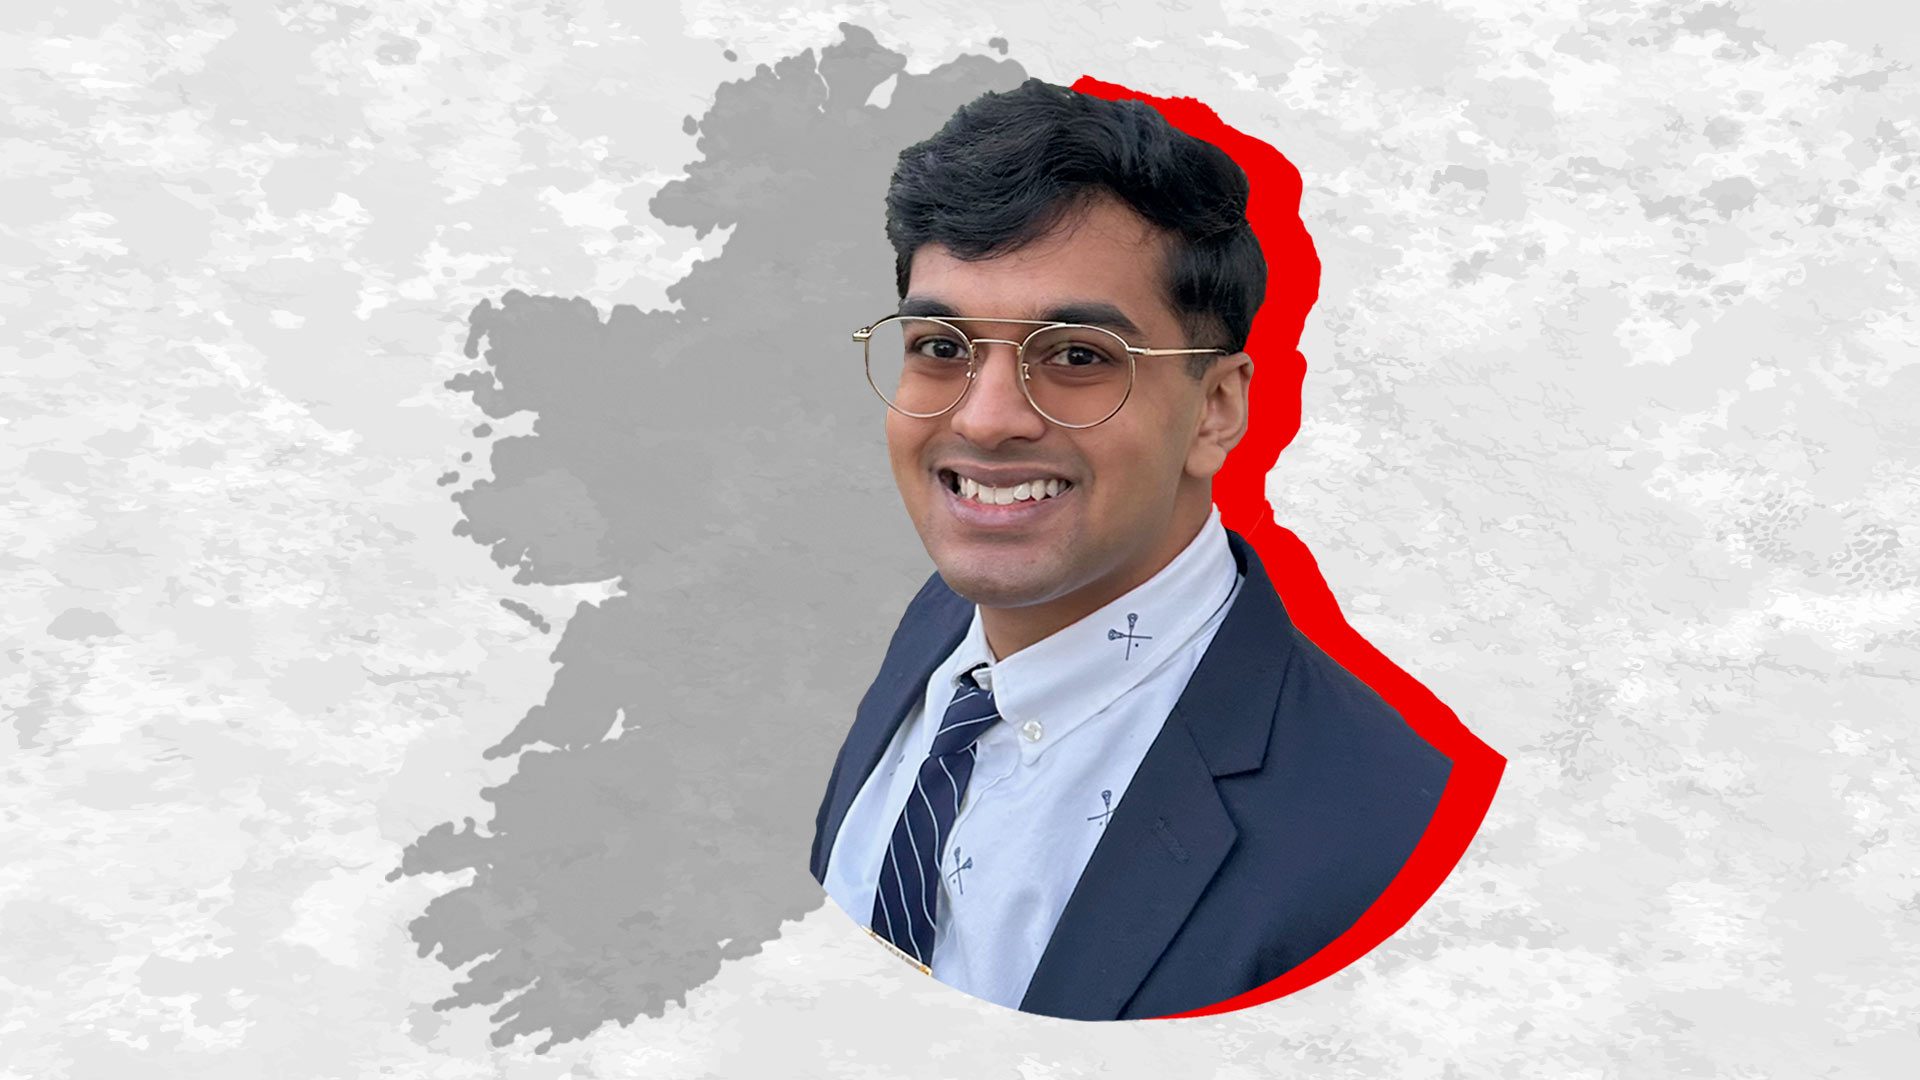 Neelesh “Neel” Mupparapu '22 will pursue a master’s degree in public health at University College Cork through his Mitchell Scholarship. The honor recognizes the bioengineering graduate's scholarship, leadership and commitment to community and public service.